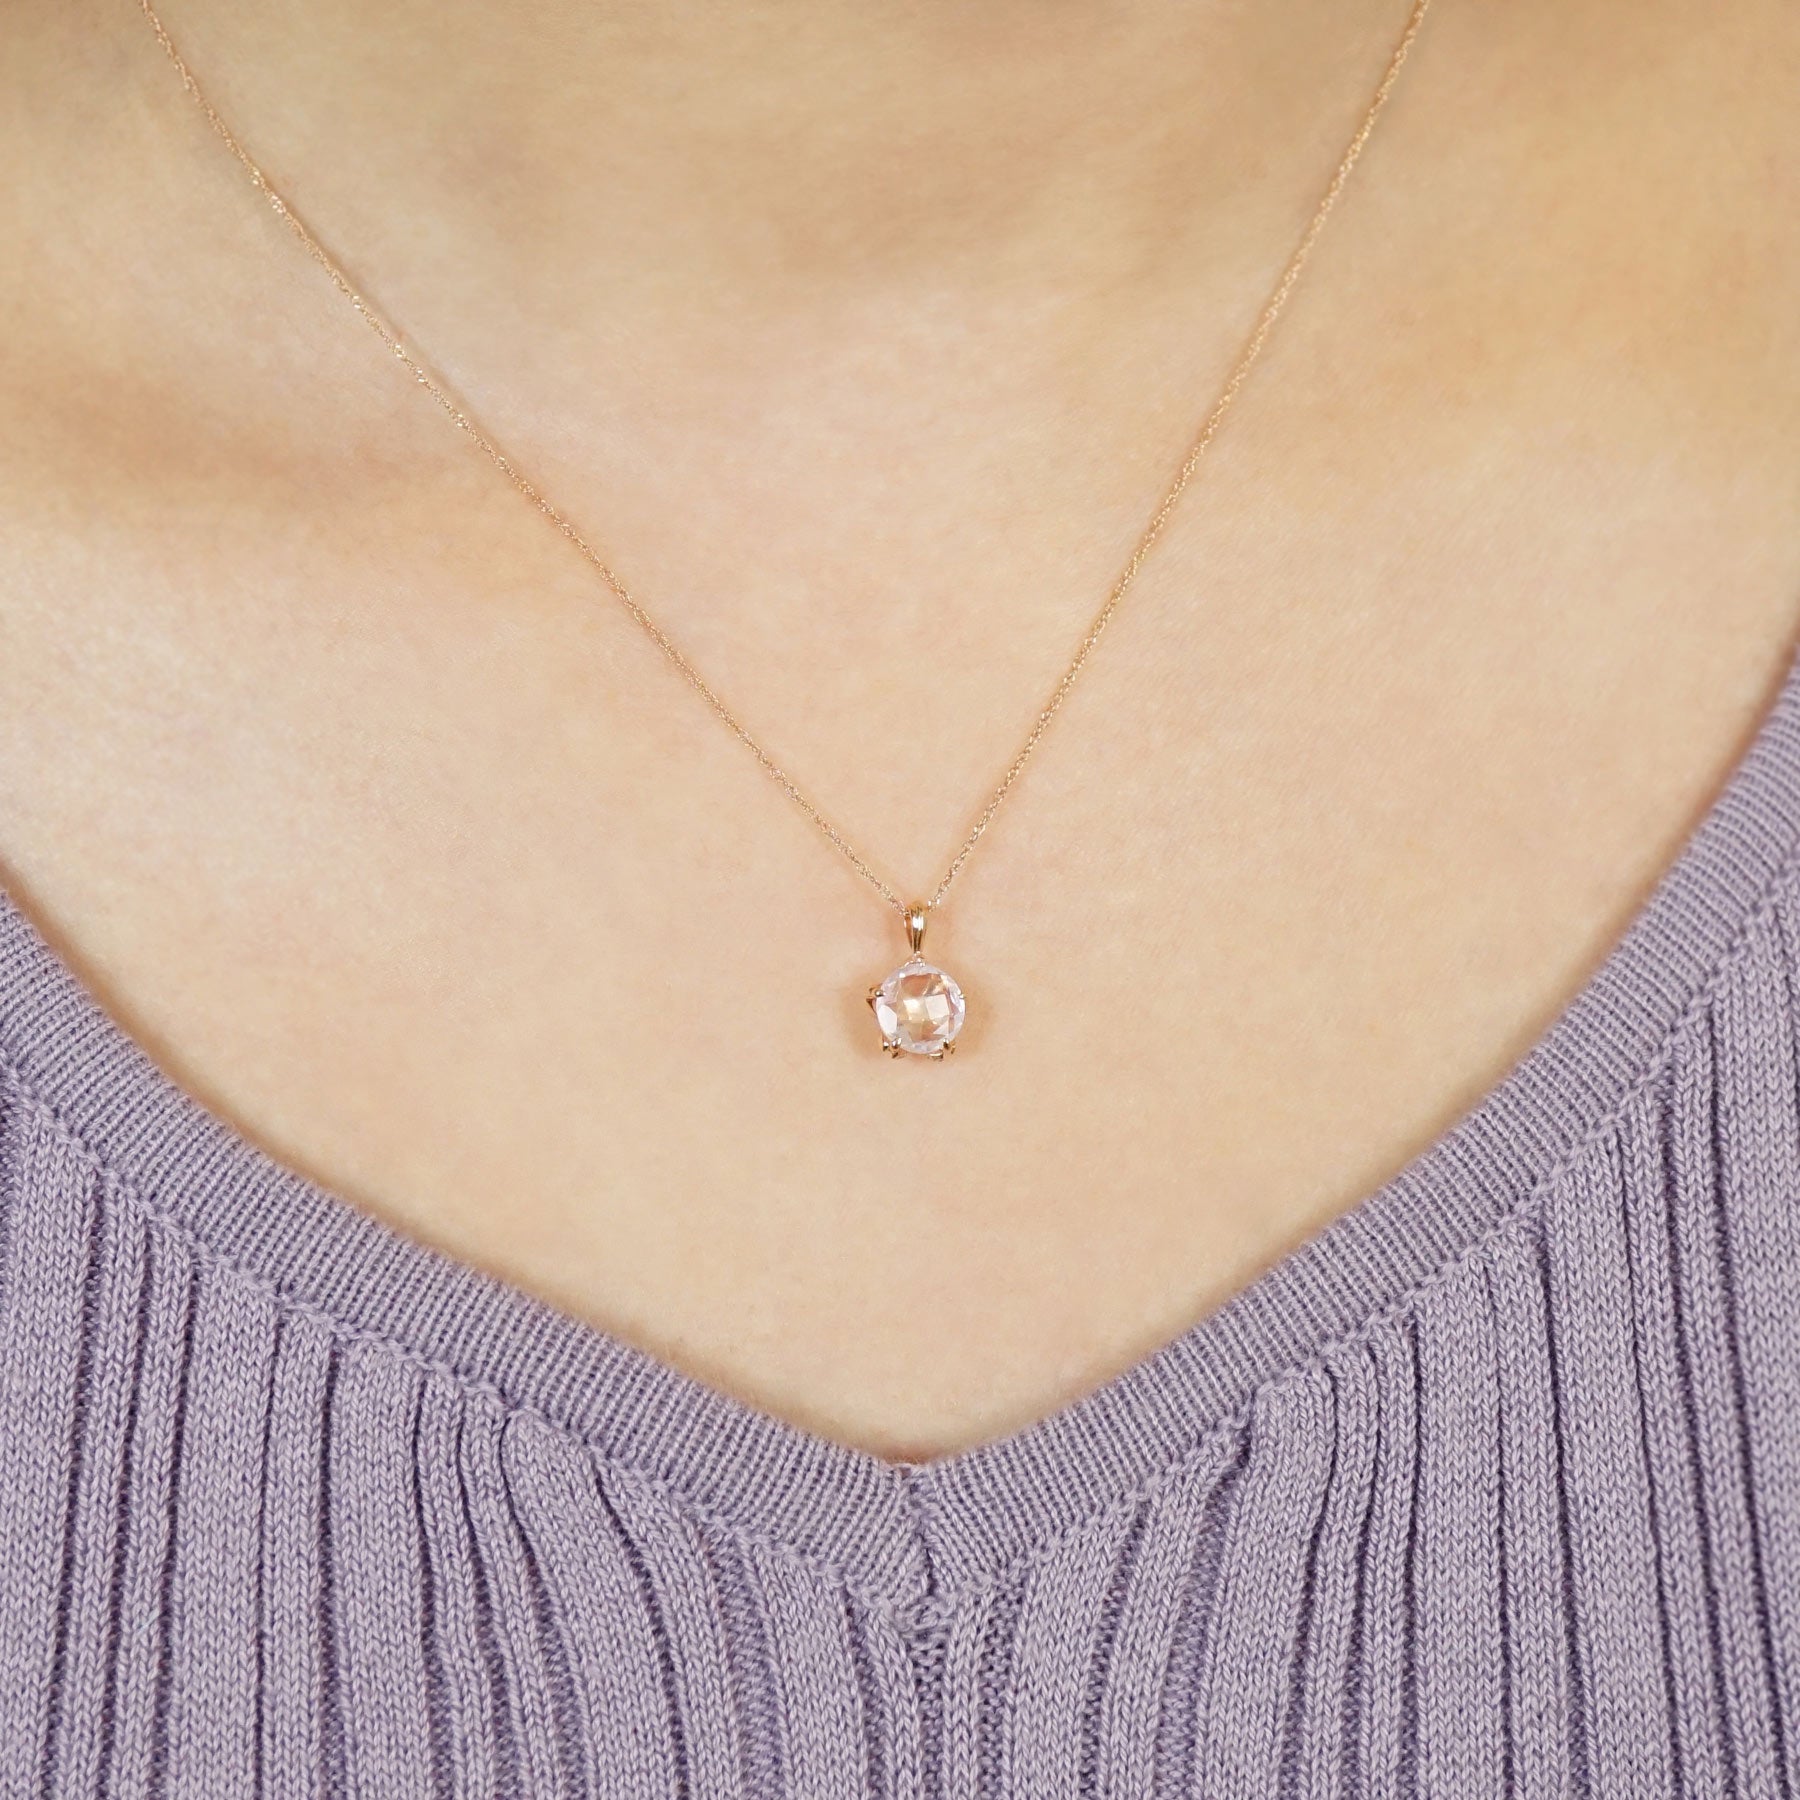 [Birth Flower Jewelry] April - Cherry Blossoms Reversible Necklace (10K Rose Gold) - Model Image